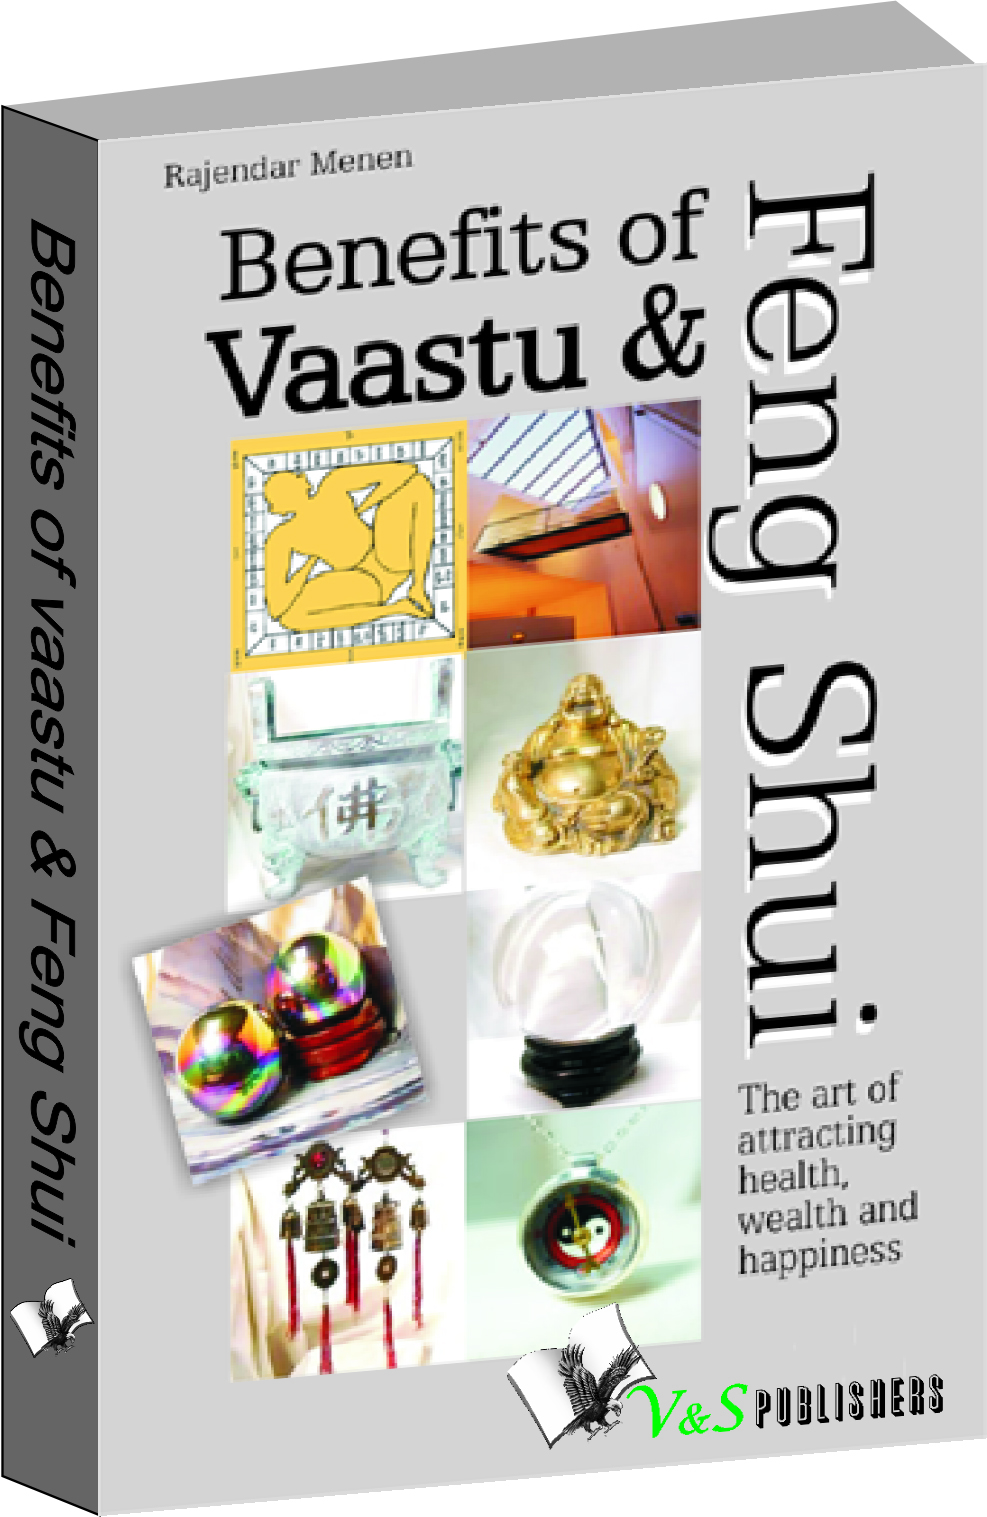 Benefits Of Vaastu & Feng Shui-The art of attracting health, wealth and happiness